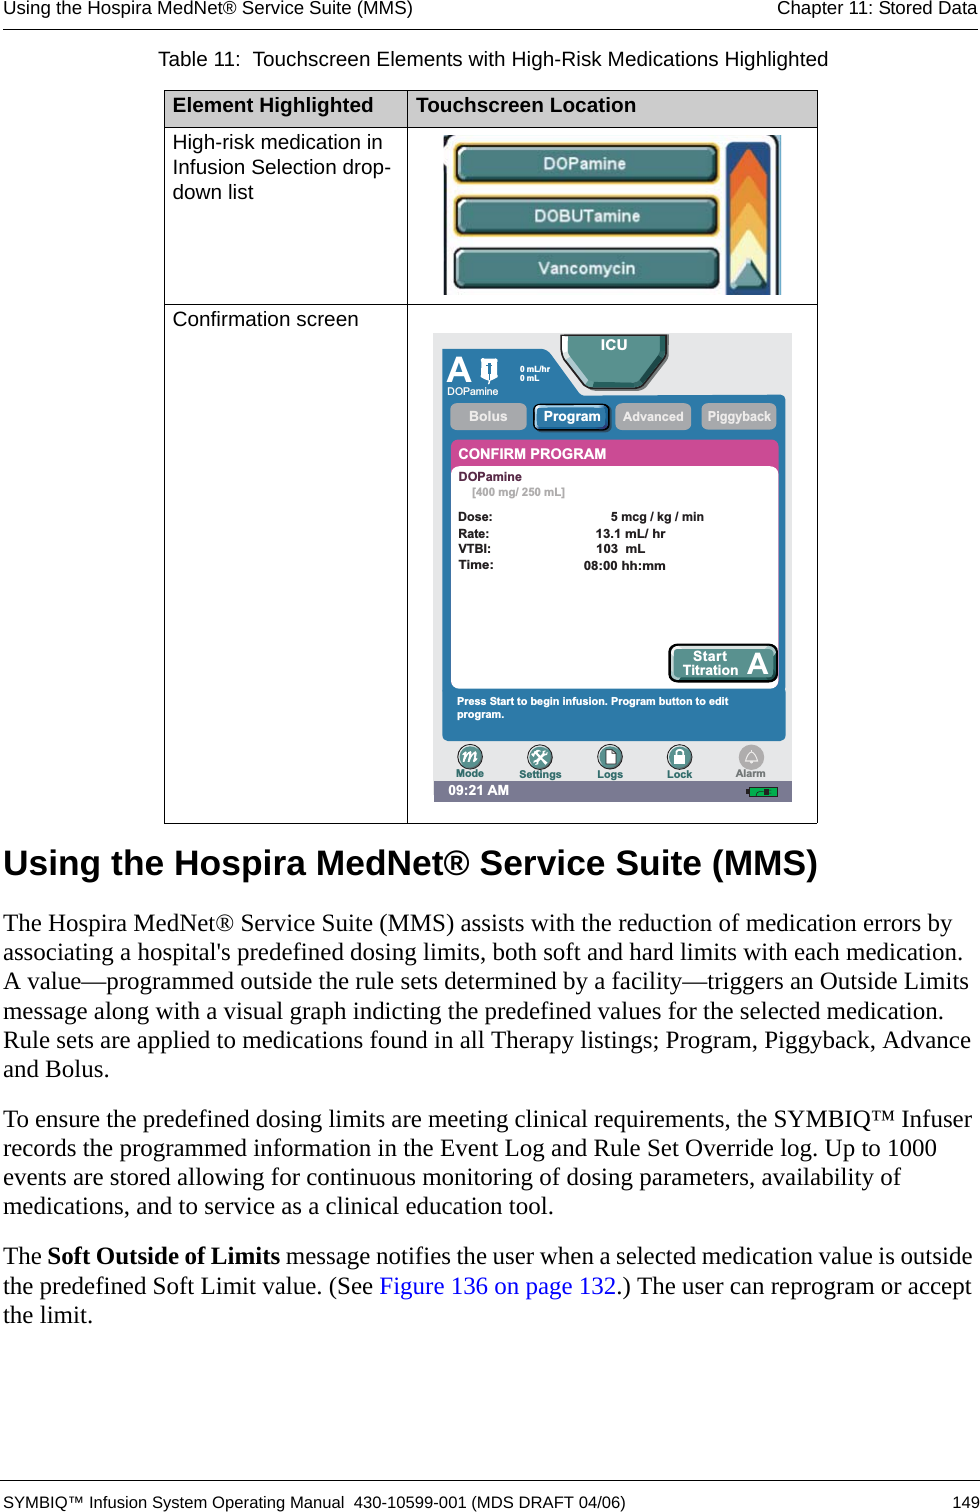 Using the Hospira MedNet® Service Suite (MMS) Chapter 11: Stored Data SYMBIQ™ Infusion System Operating Manual  430-10599-001 (MDS DRAFT 04/06) 149Using the Hospira MedNet® Service Suite (MMS)The Hospira MedNet® Service Suite (MMS) assists with the reduction of medication errors by associating a hospital&apos;s predefined dosing limits, both soft and hard limits with each medication. A value—programmed outside the rule sets determined by a facility—triggers an Outside Limits message along with a visual graph indicting the predefined values for the selected medication. Rule sets are applied to medications found in all Therapy listings; Program, Piggyback, Advance and Bolus. To ensure the predefined dosing limits are meeting clinical requirements, the SYMBIQ™ Infuser records the programmed information in the Event Log and Rule Set Override log. Up to 1000 events are stored allowing for continuous monitoring of dosing parameters, availability of medications, and to service as a clinical education tool.The Soft Outside of Limits message notifies the user when a selected medication value is outside the predefined Soft Limit value. (See Figure 136 on page 132.) The user can reprogram or accept the limit. High-risk medication in Infusion Selection drop-down listConfirmation screen Table 11:  Touchscreen Elements with High-Risk Medications HighlightedElement Highlighted Touchscreen Location09:21 AMAPiggybackCONFIRM PROGRAMPress Start to begin infusion. Program button to editprogram.AdvancedStartTitration ABolusICUSettings Logs LockModeProgramAlarmRate:Dose:5mcg/kg/min0 mL/hr0mLVTBI:Time:13.1 mL/ hr103 mL08:00 hh:mmDOPamine[400 mg/ 250 mL]DOPamine